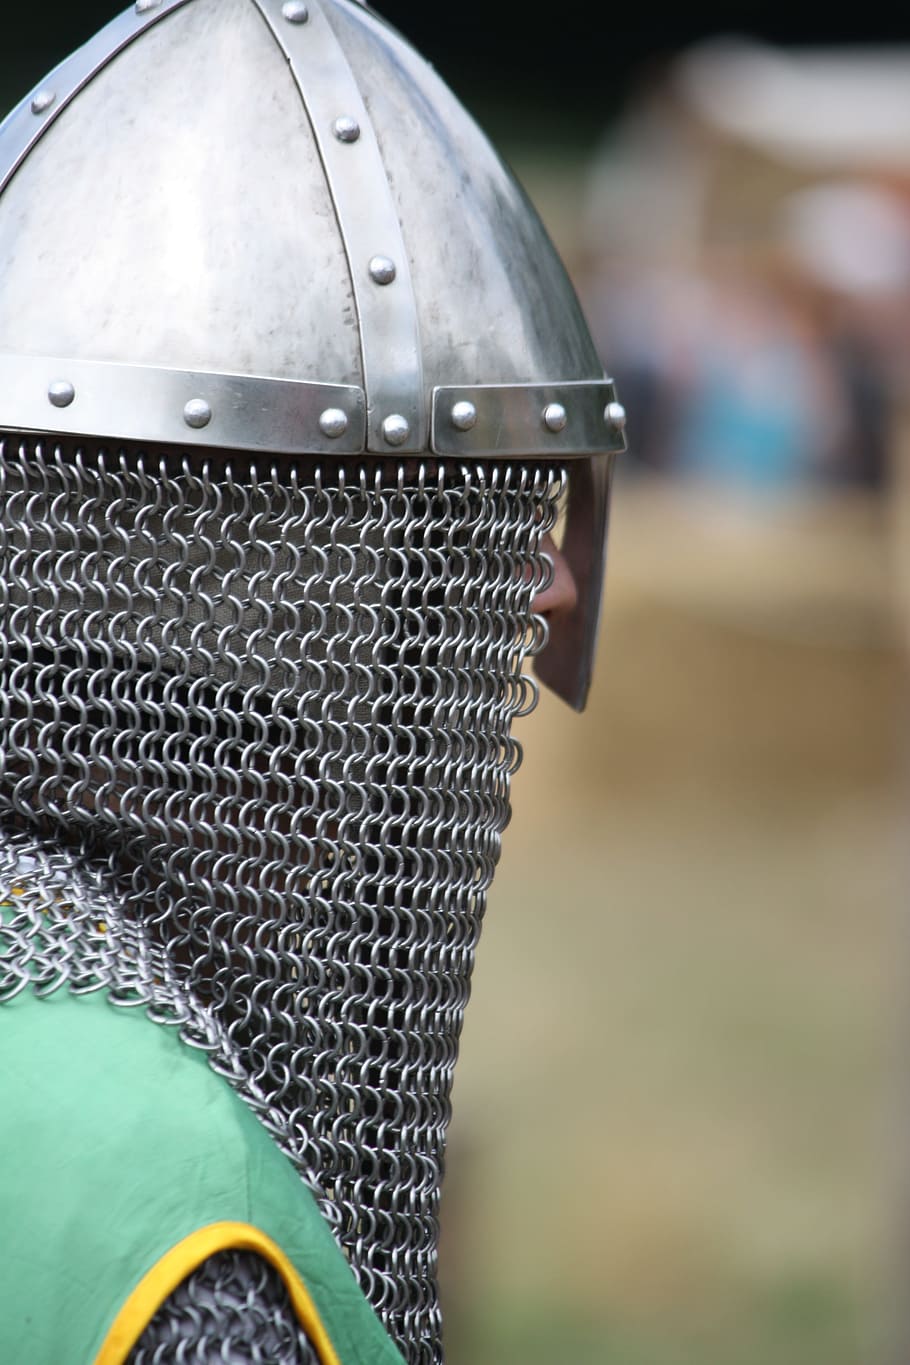 knight, middle ages, armor, fight, metal, clothing, history, helm, ritterruestung, chainmail